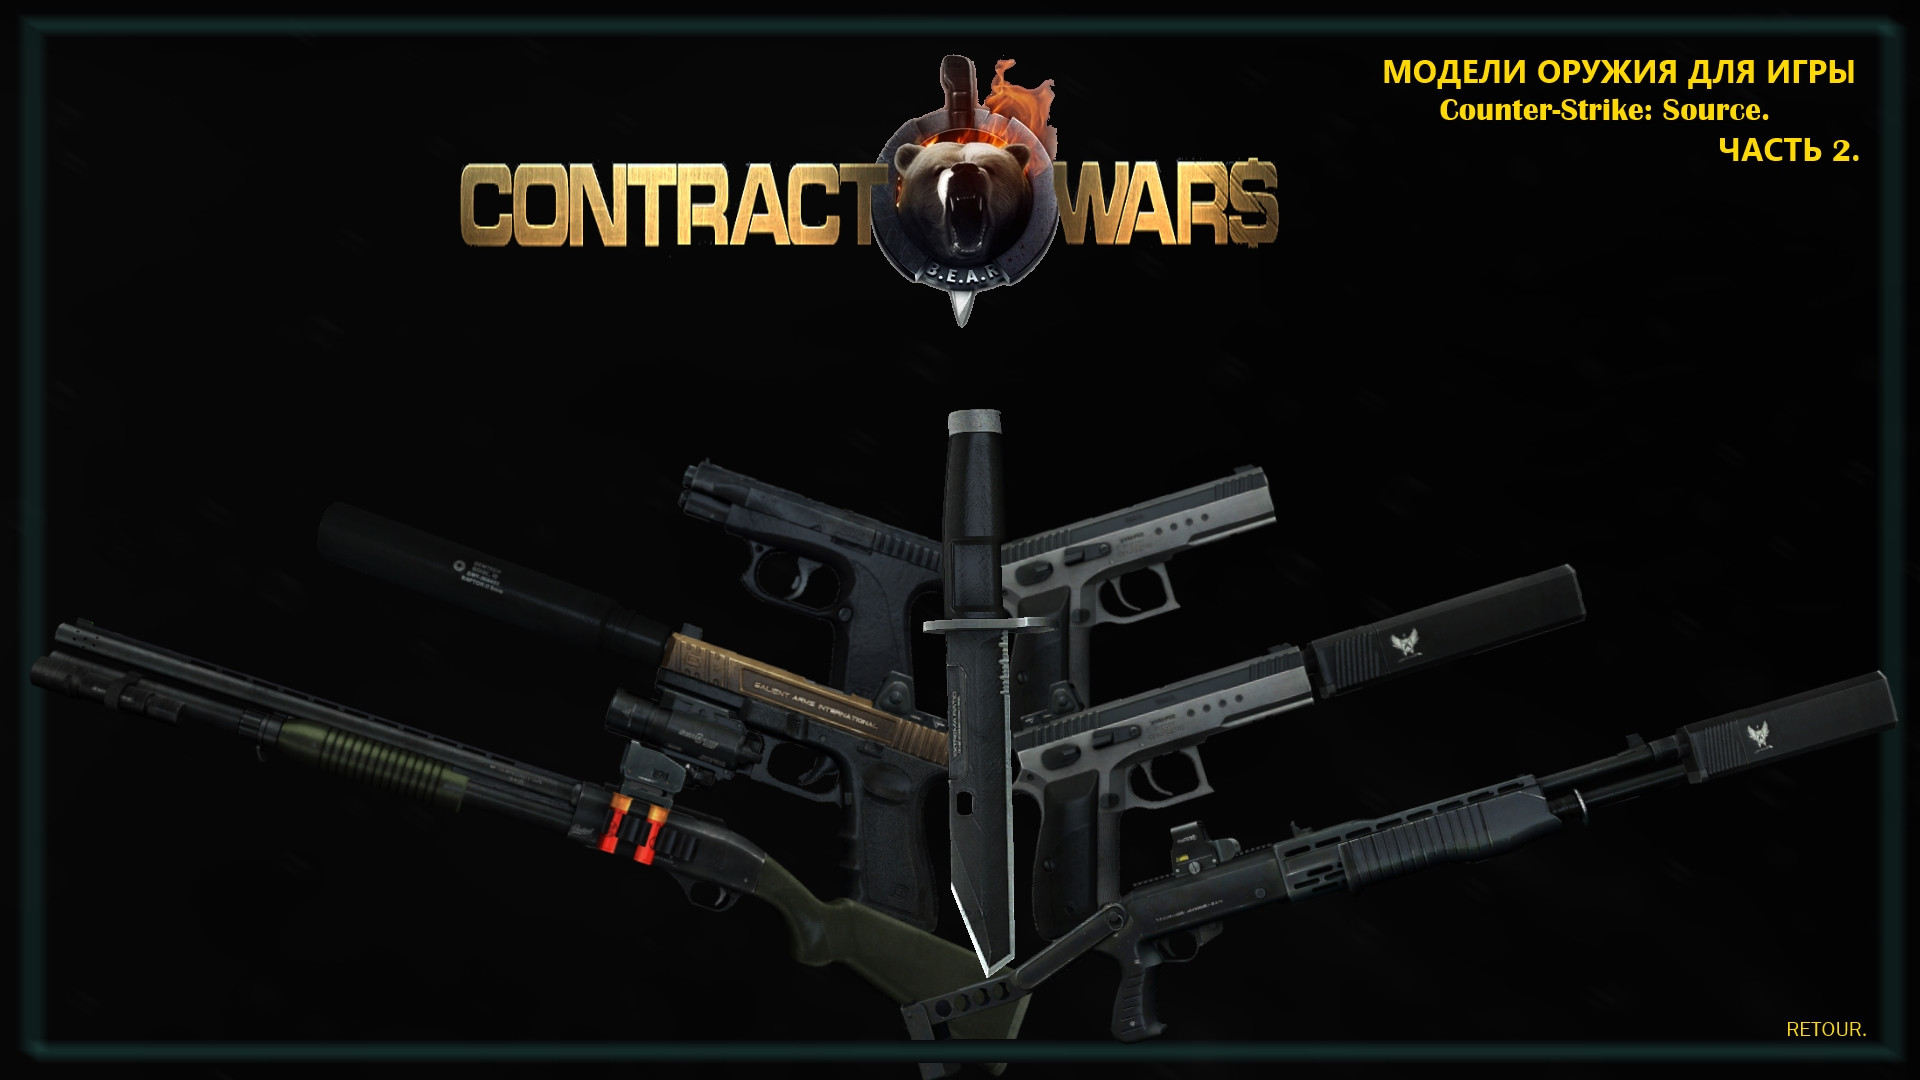 Contract Wars Weapons Pack [Counter-Strike: Source] [Mods]